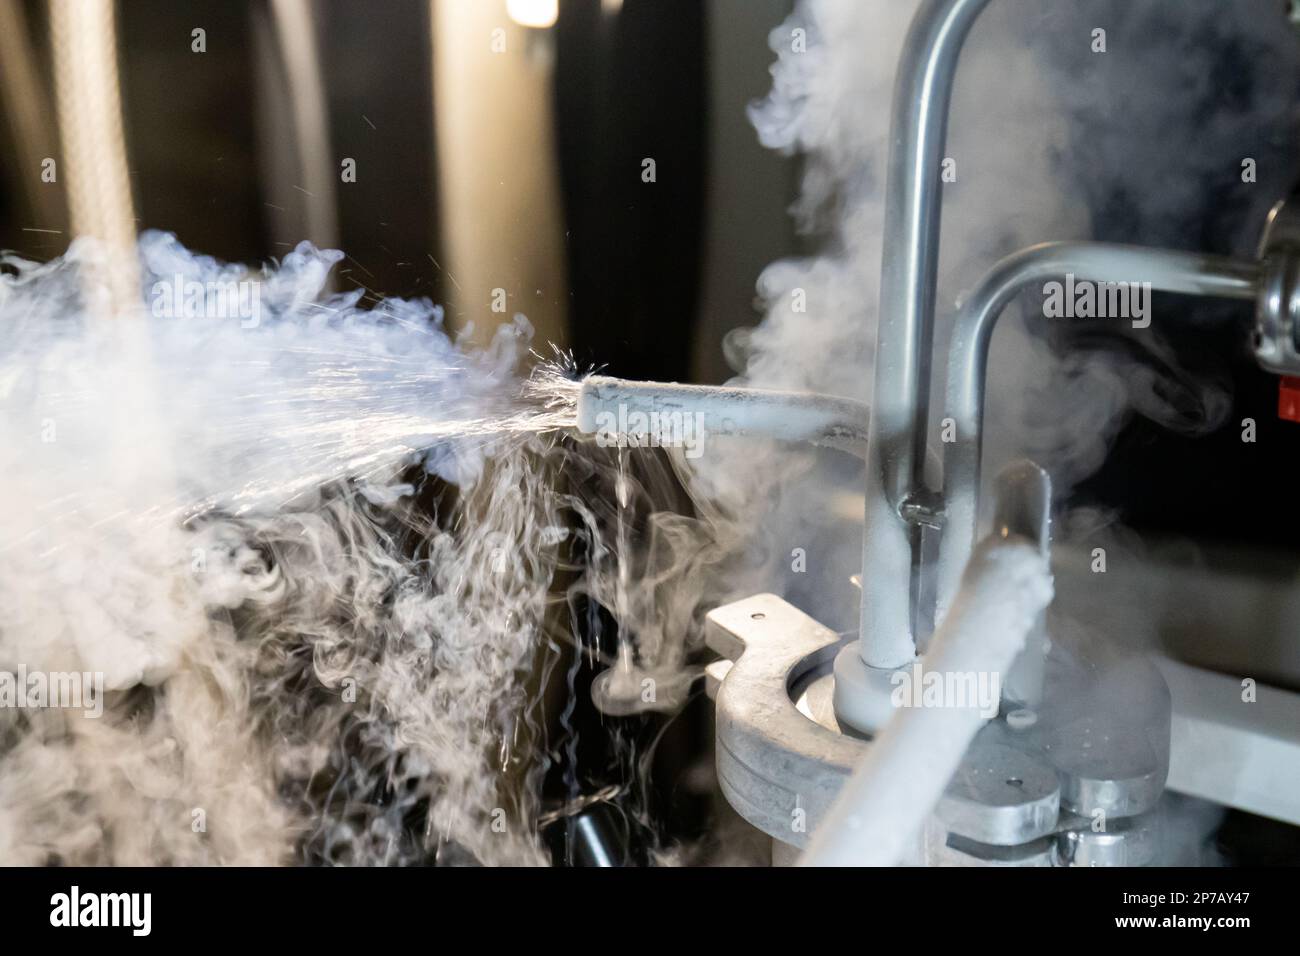 Liquid nitrogen splashing out along gas emanating from pressurized tank thermal rubber hose connected to metal pipes and red hand valves. Stock Photo